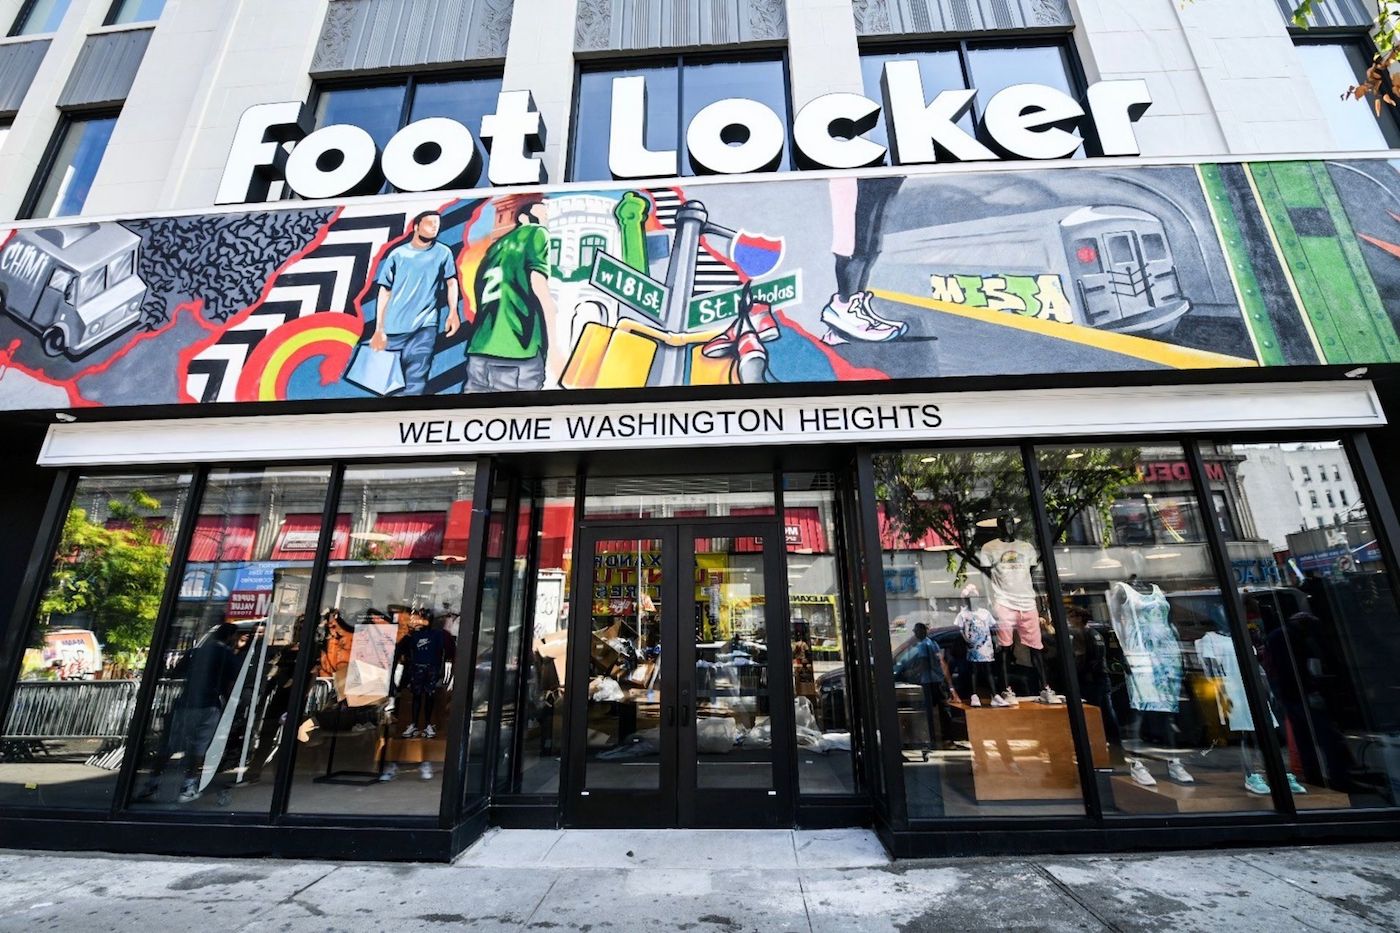 Foot Locker Moves Away from Malls with Plans to Close 400 Underperforming  Stores - Retail TouchPoints